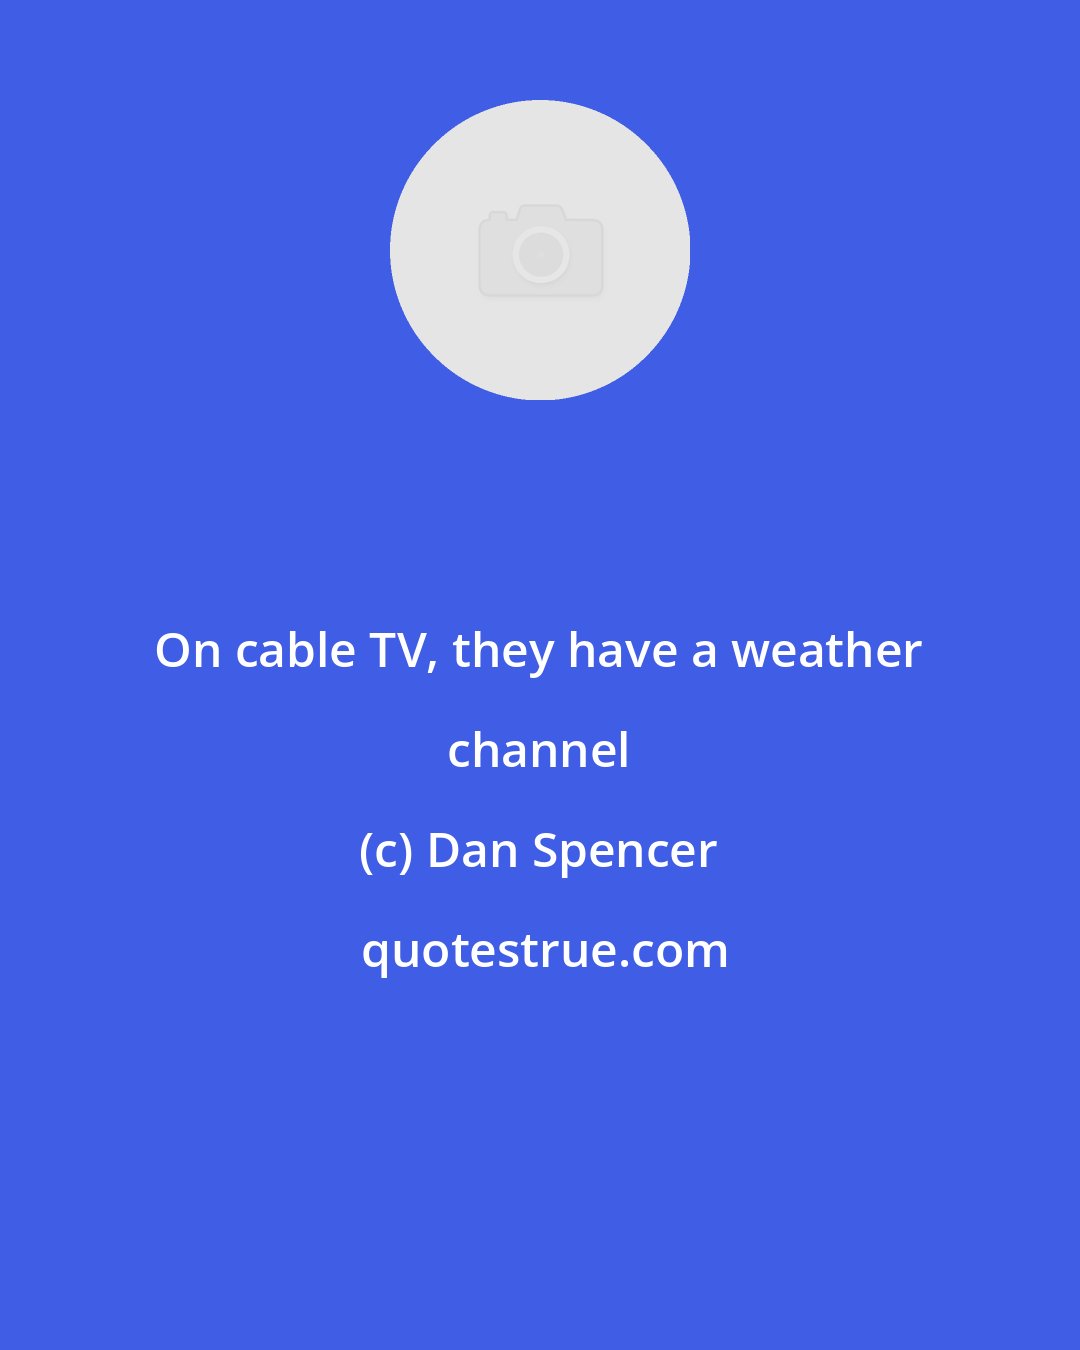 Dan Spencer: On cable TV, they have a weather channel